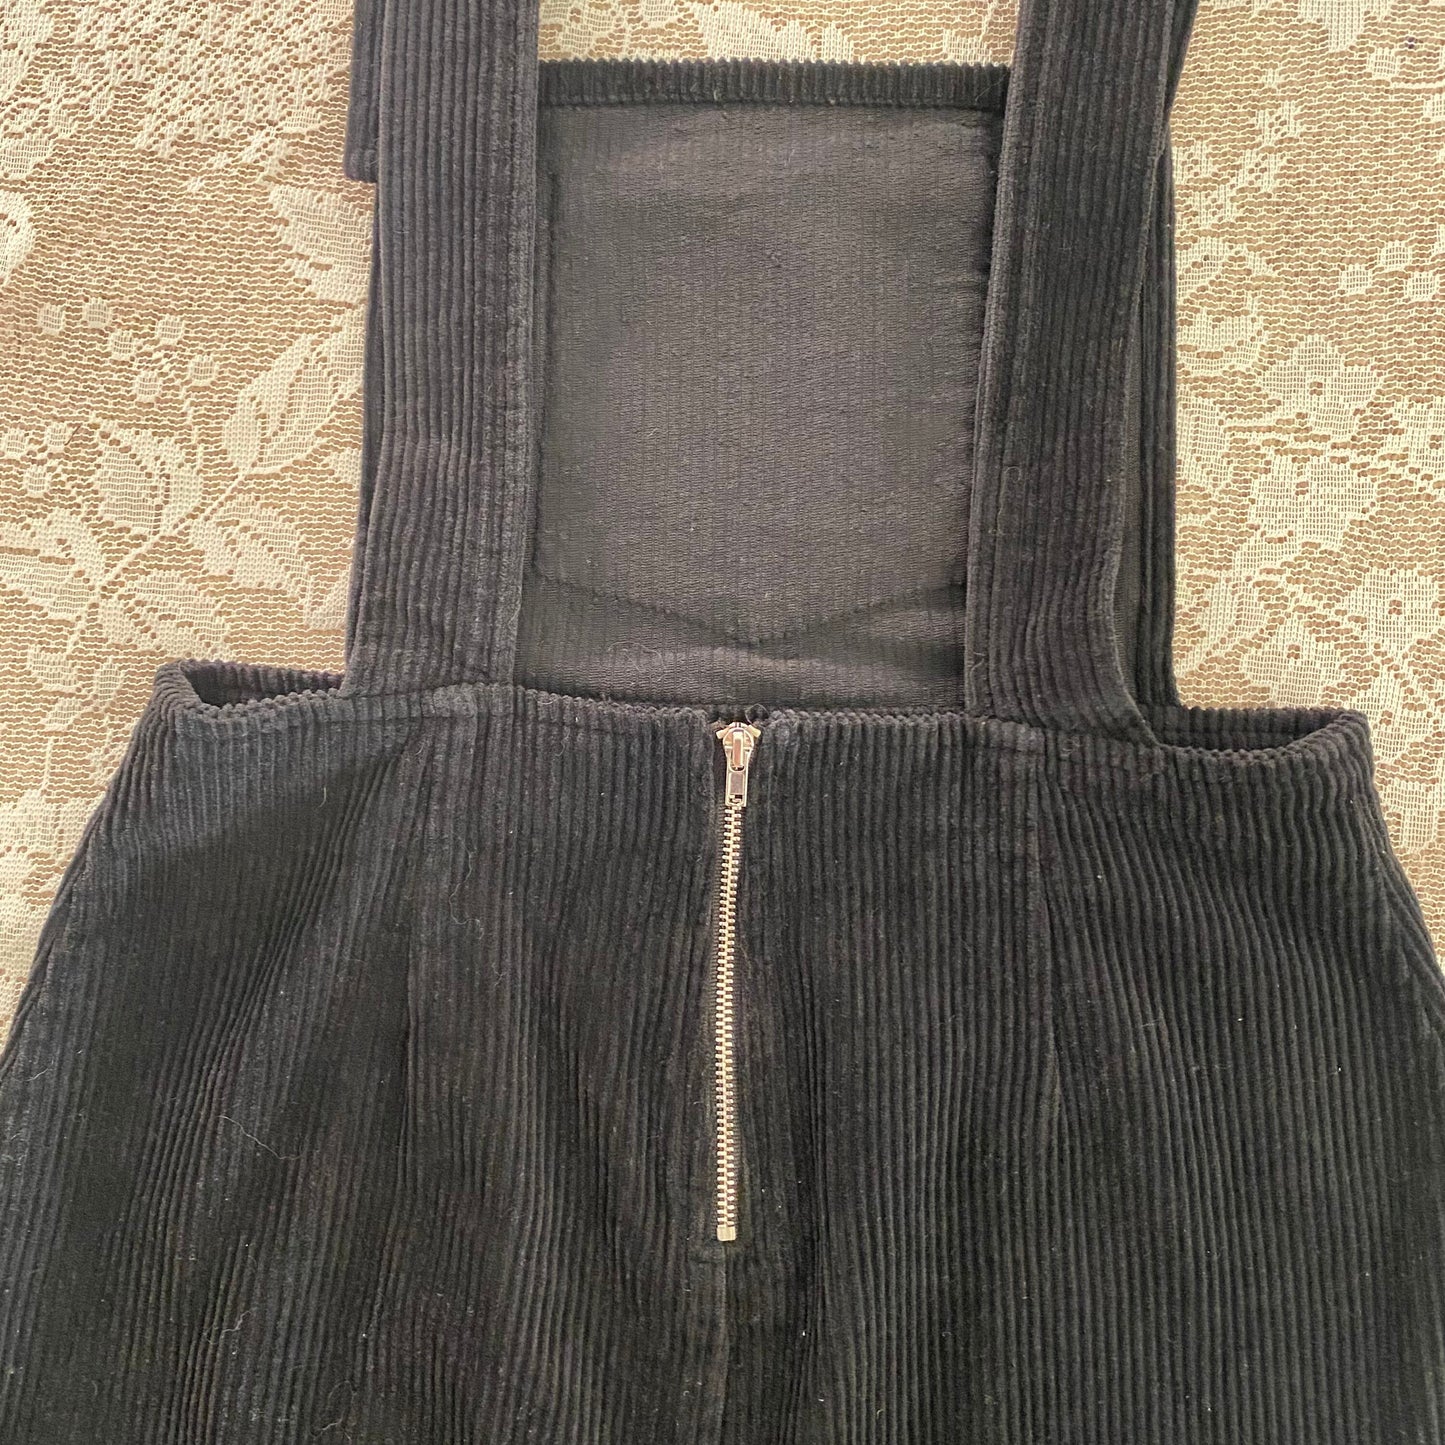 Patched Corduroy Overalls